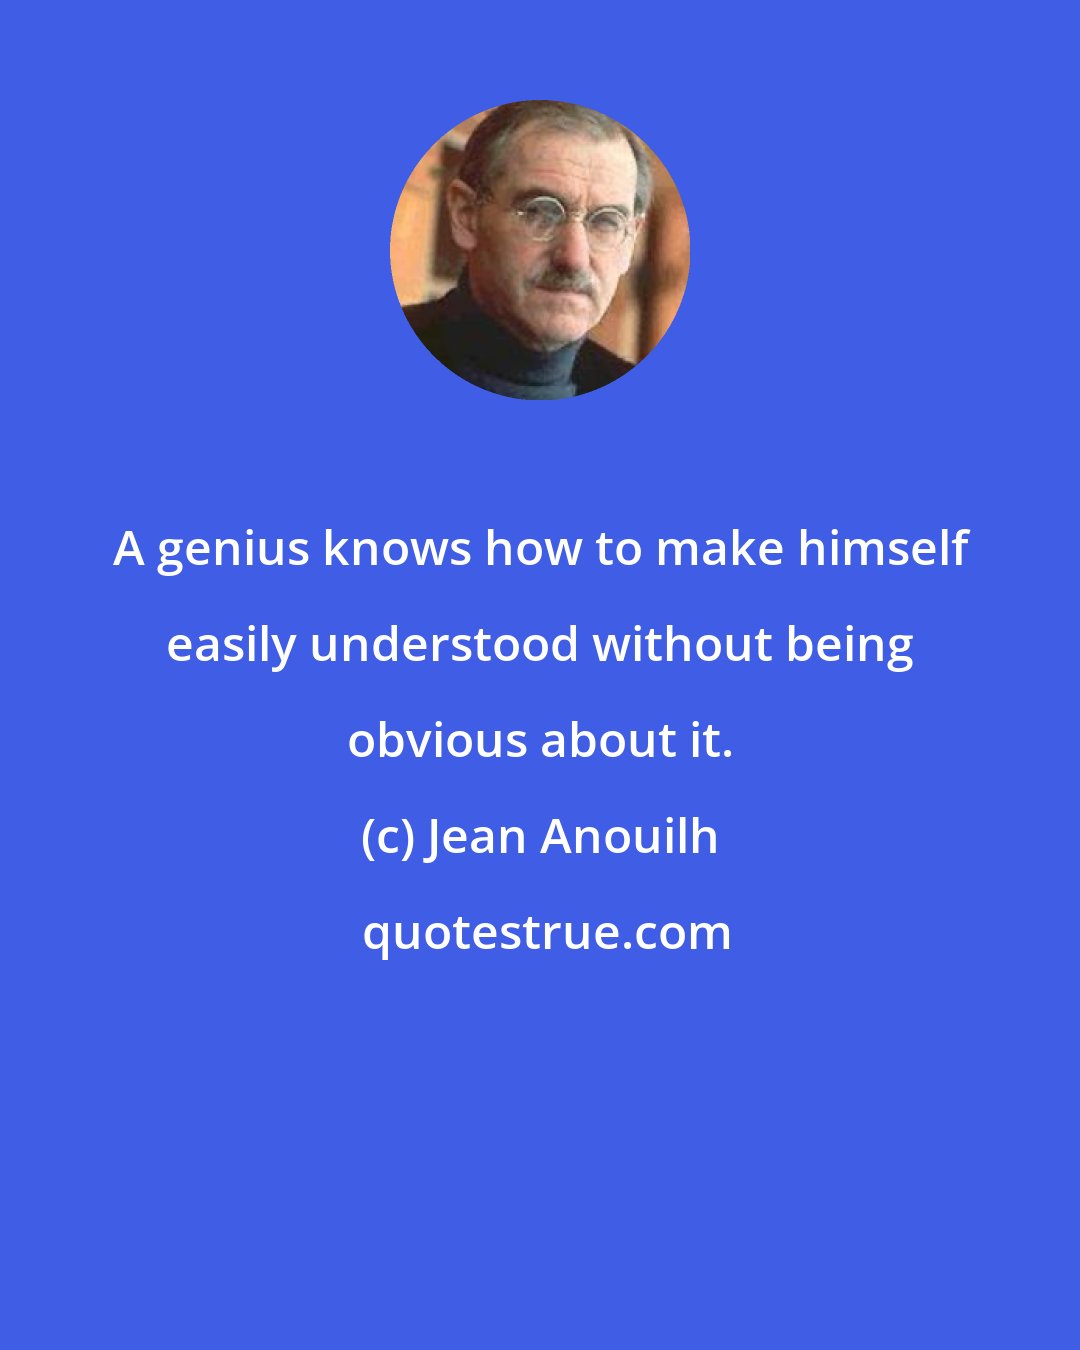 Jean Anouilh: A genius knows how to make himself easily understood without being obvious about it.